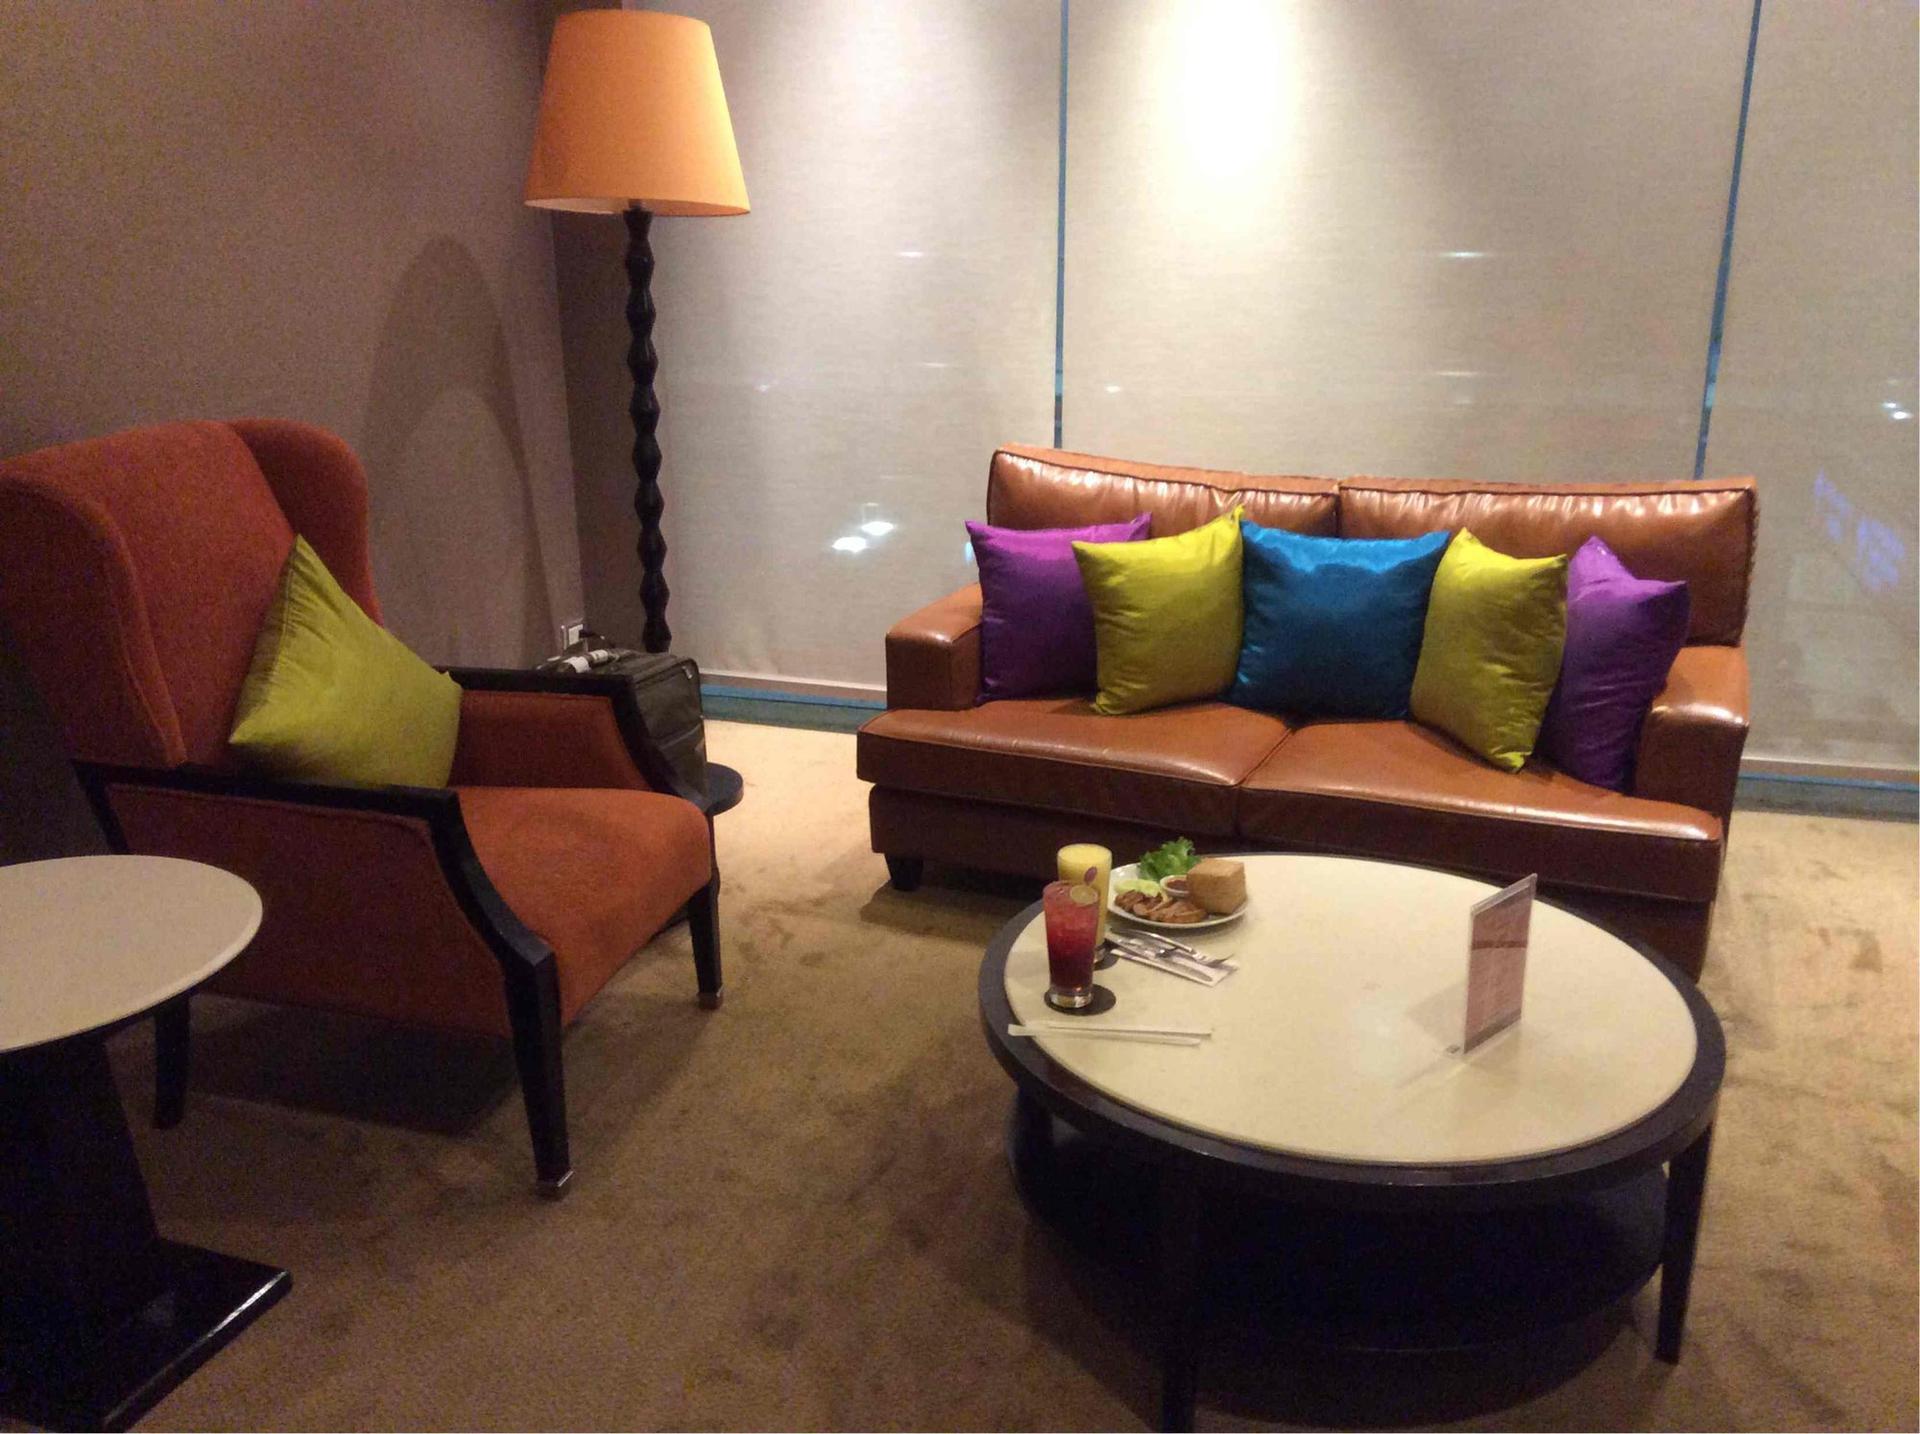 Thai Airways Royal First Class Lounge image 6 of 44